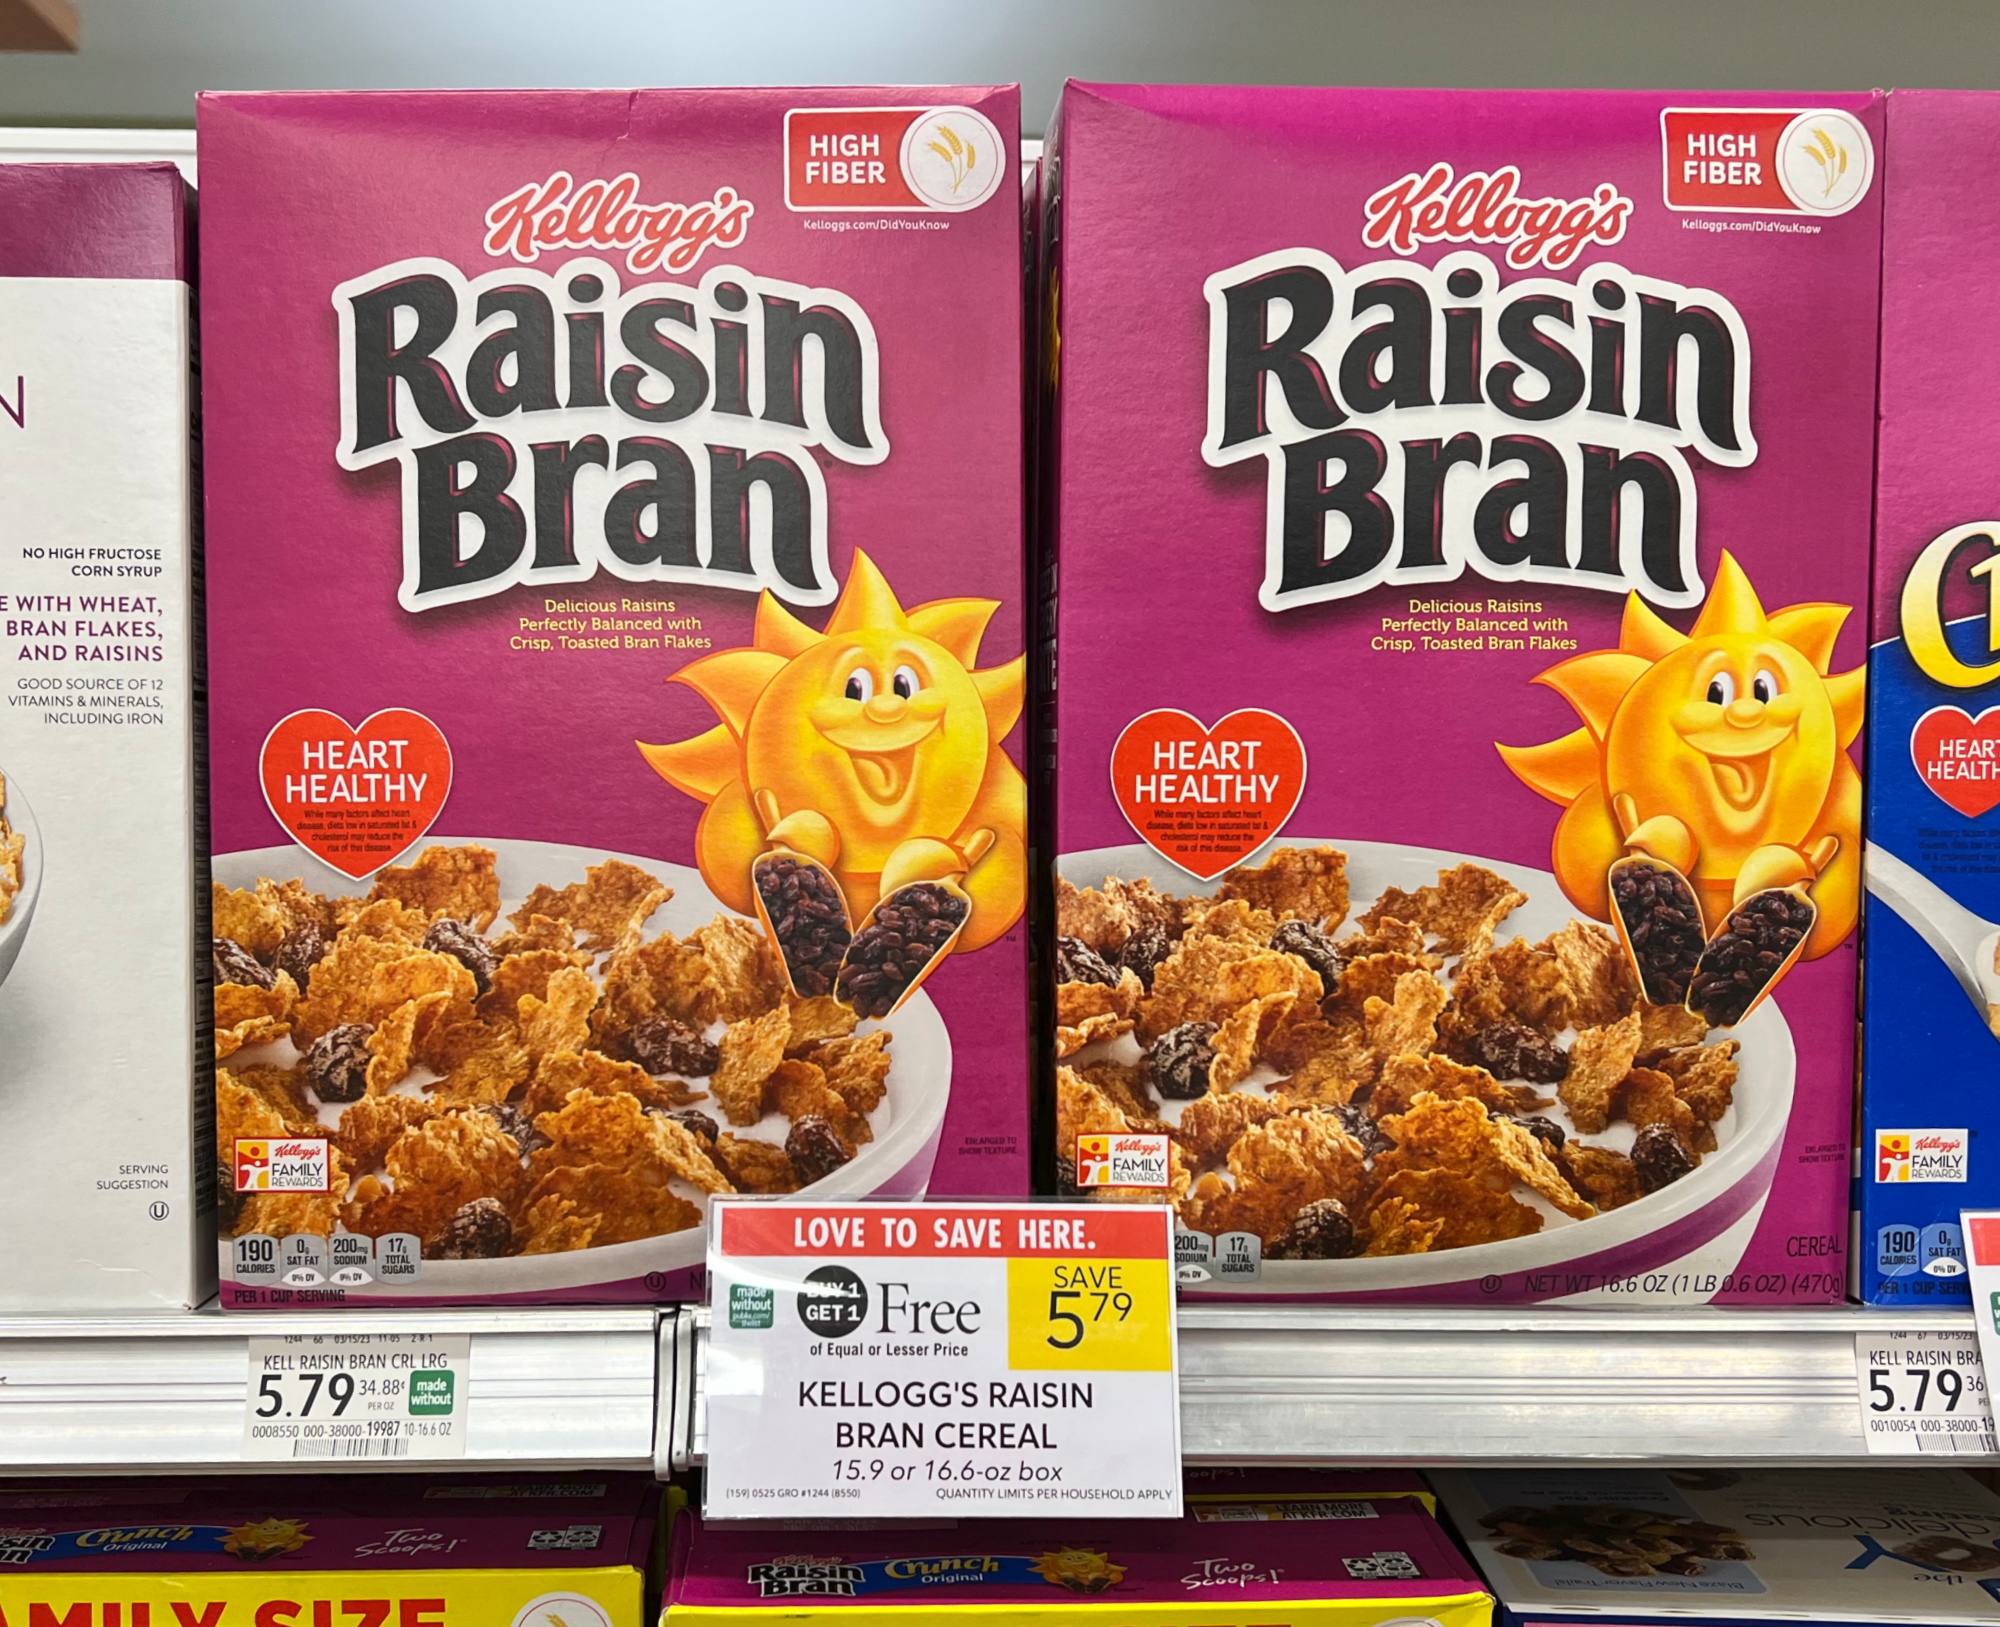 Get A Deal On Kellogg’s Raisin Bran Cereal At Publix – As Low As $1.40 ...